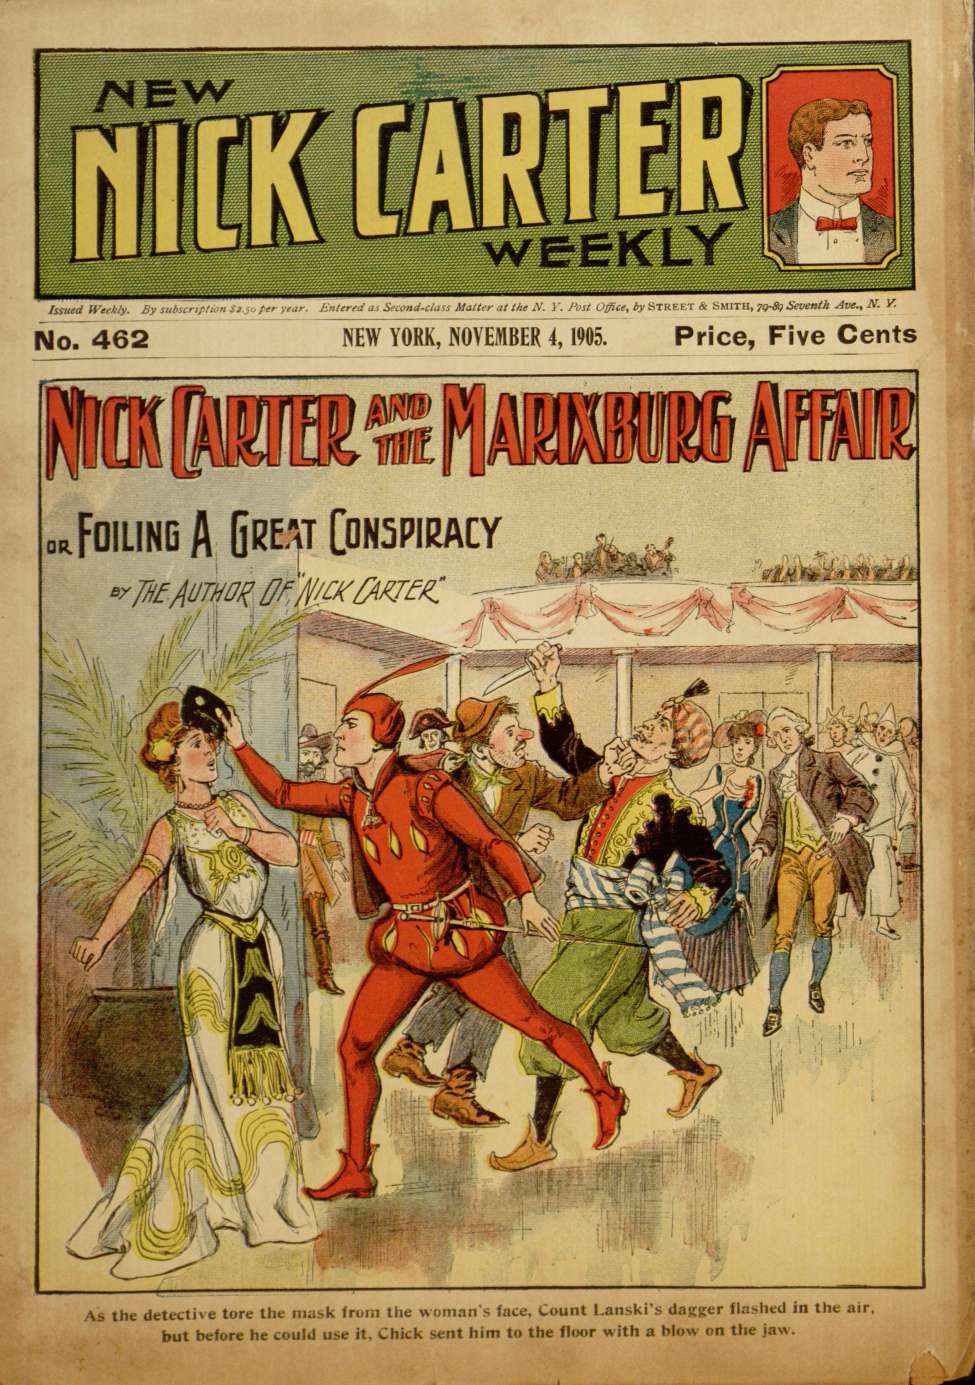 Book Cover For New Nick Carter Weekly 462 - The Marixburg Affair